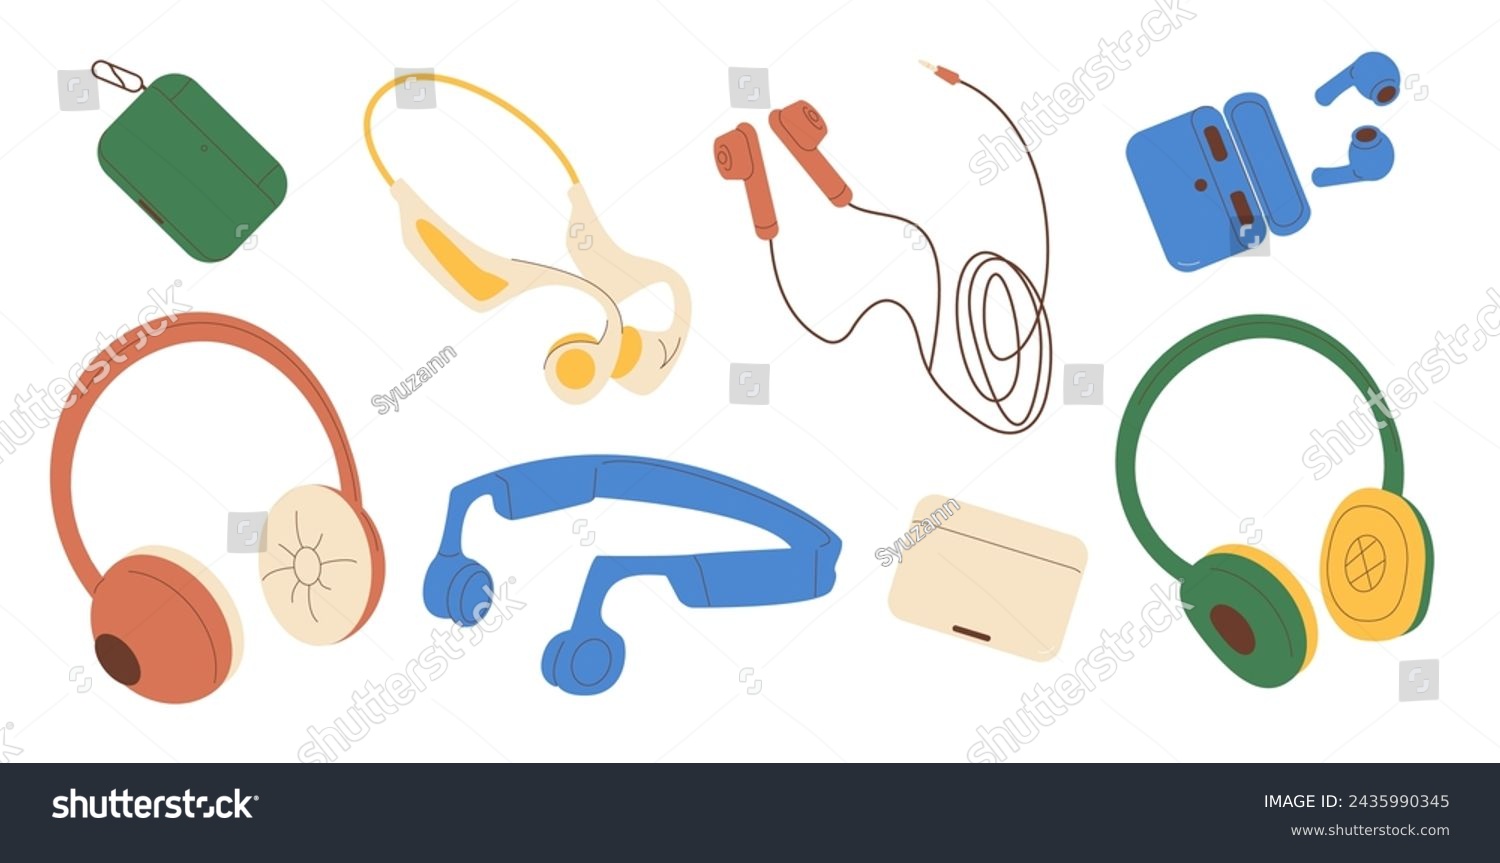 SVG of Headphones set isolated on white background. Wired, wireless and bone conduction audio equipment for music listening. Earbuds devices accessory in case. Vector flat illustration. svg